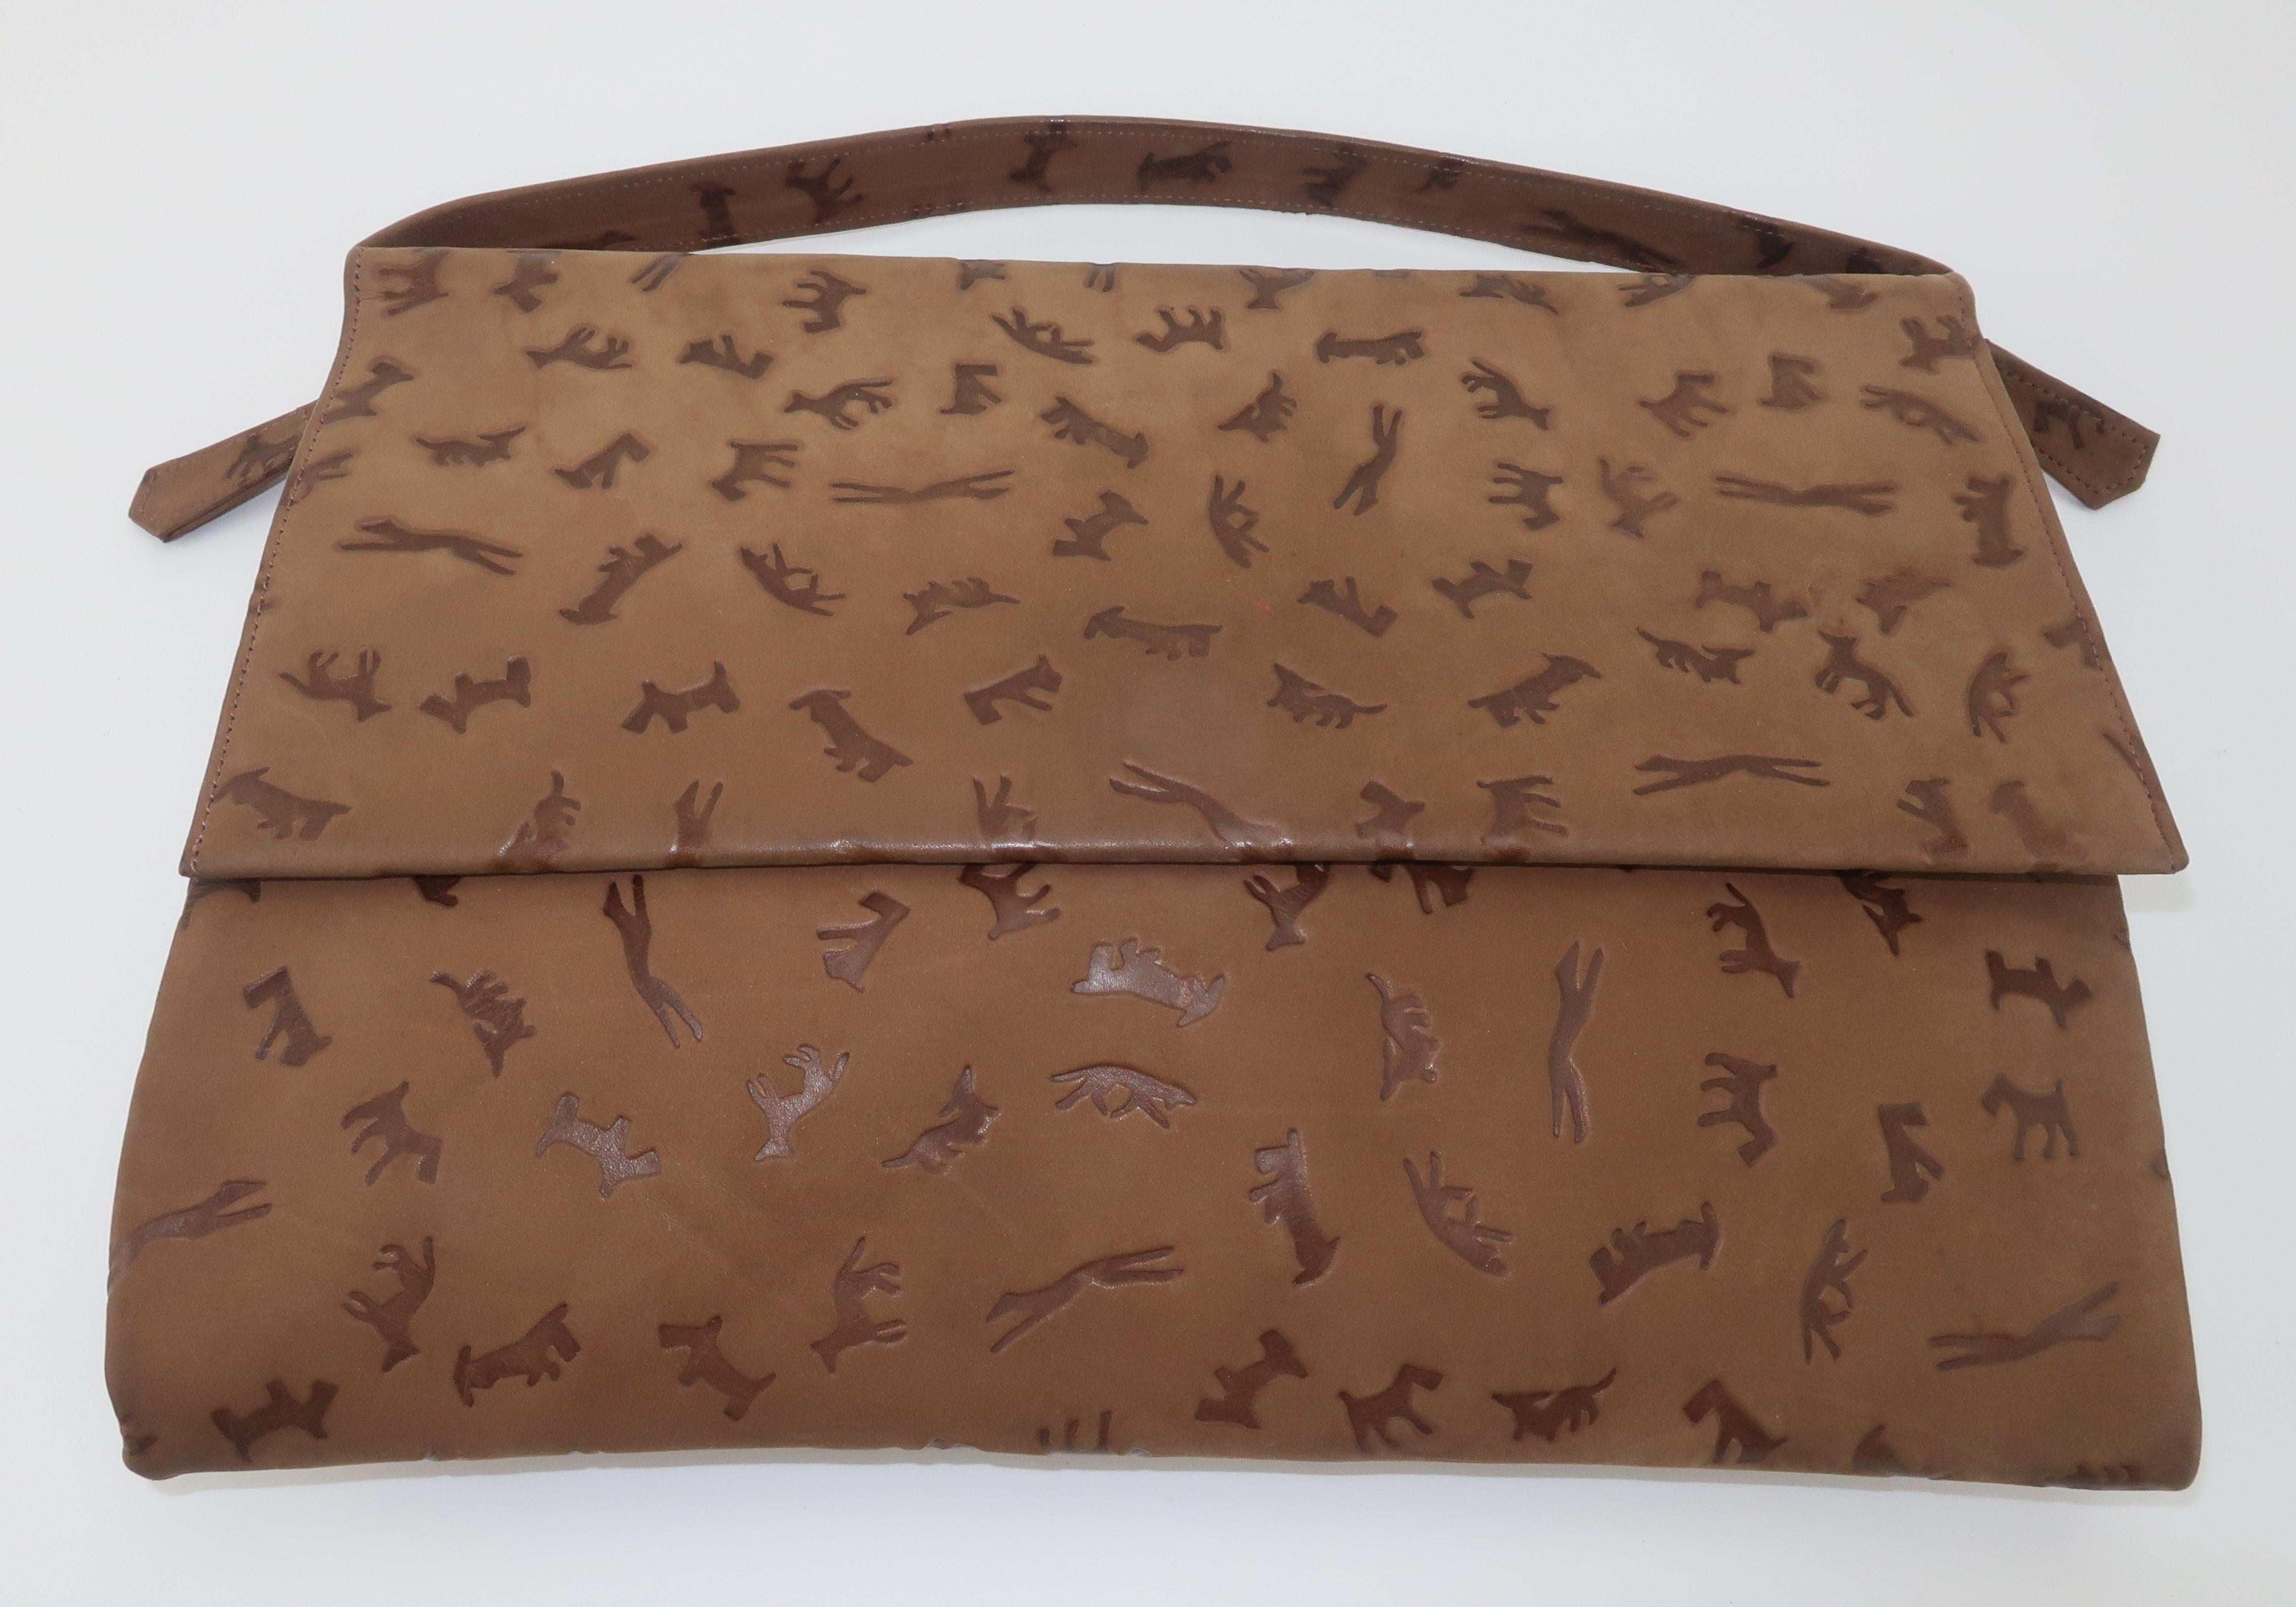 1960's Lederer brown suede envelope style handbag with an embossed pattern depicting dogs in various and witty shapes and sizes.  It has a simple top handle and snap front closure with two zippered compartments.  The interior is lined in satin with